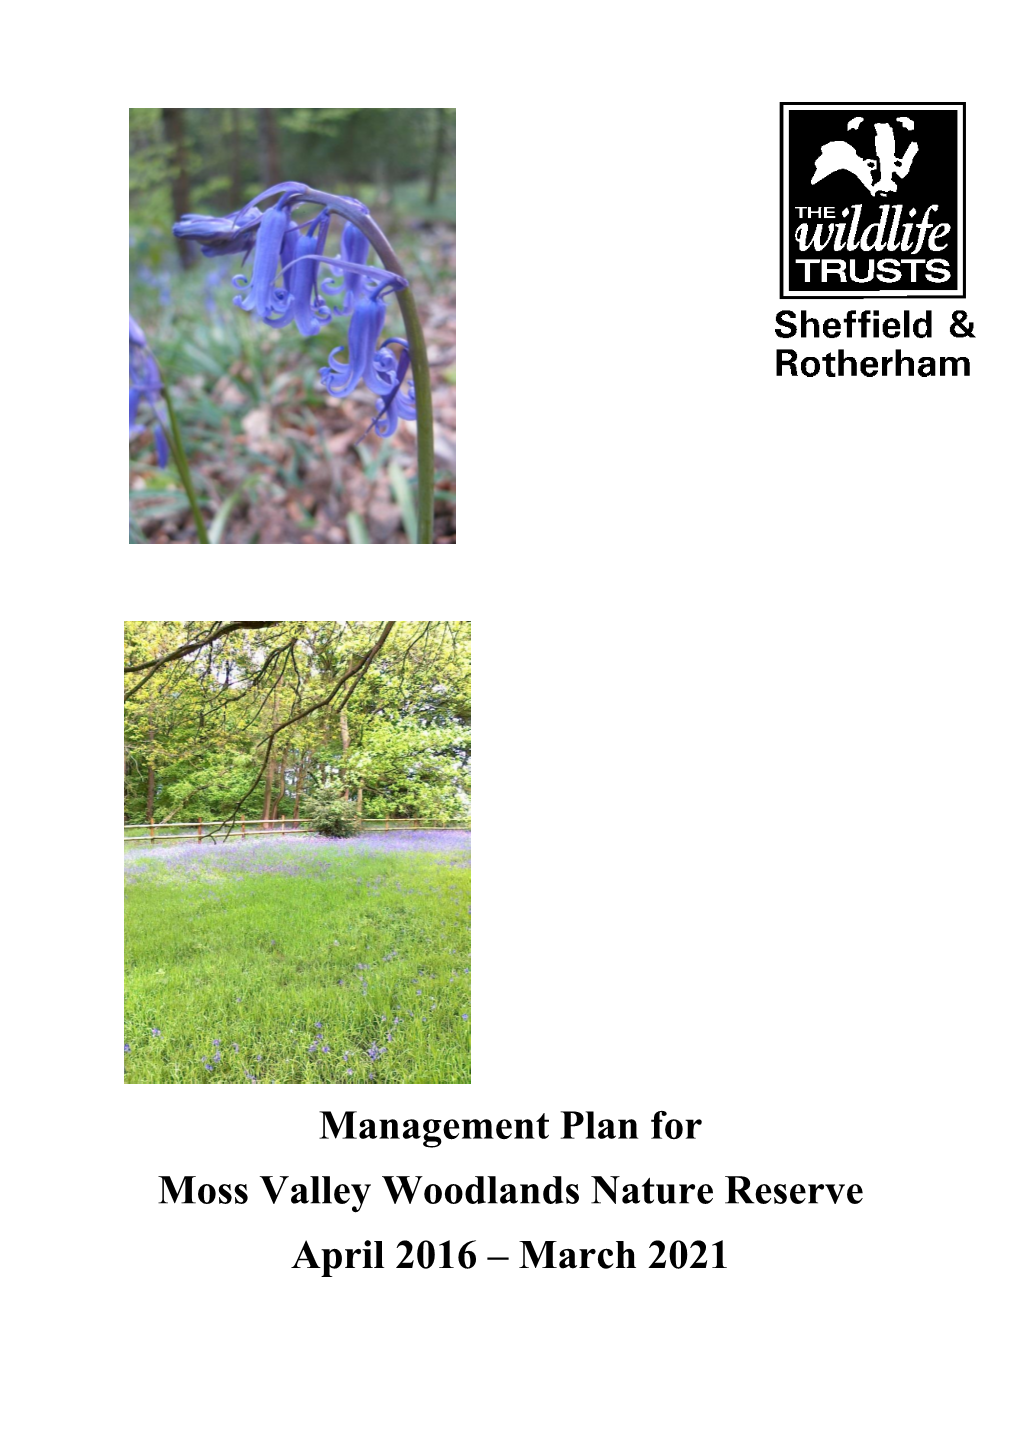 Management Plan for Moss Valley Woodlands Nature Reserve April 2016 – March 2021